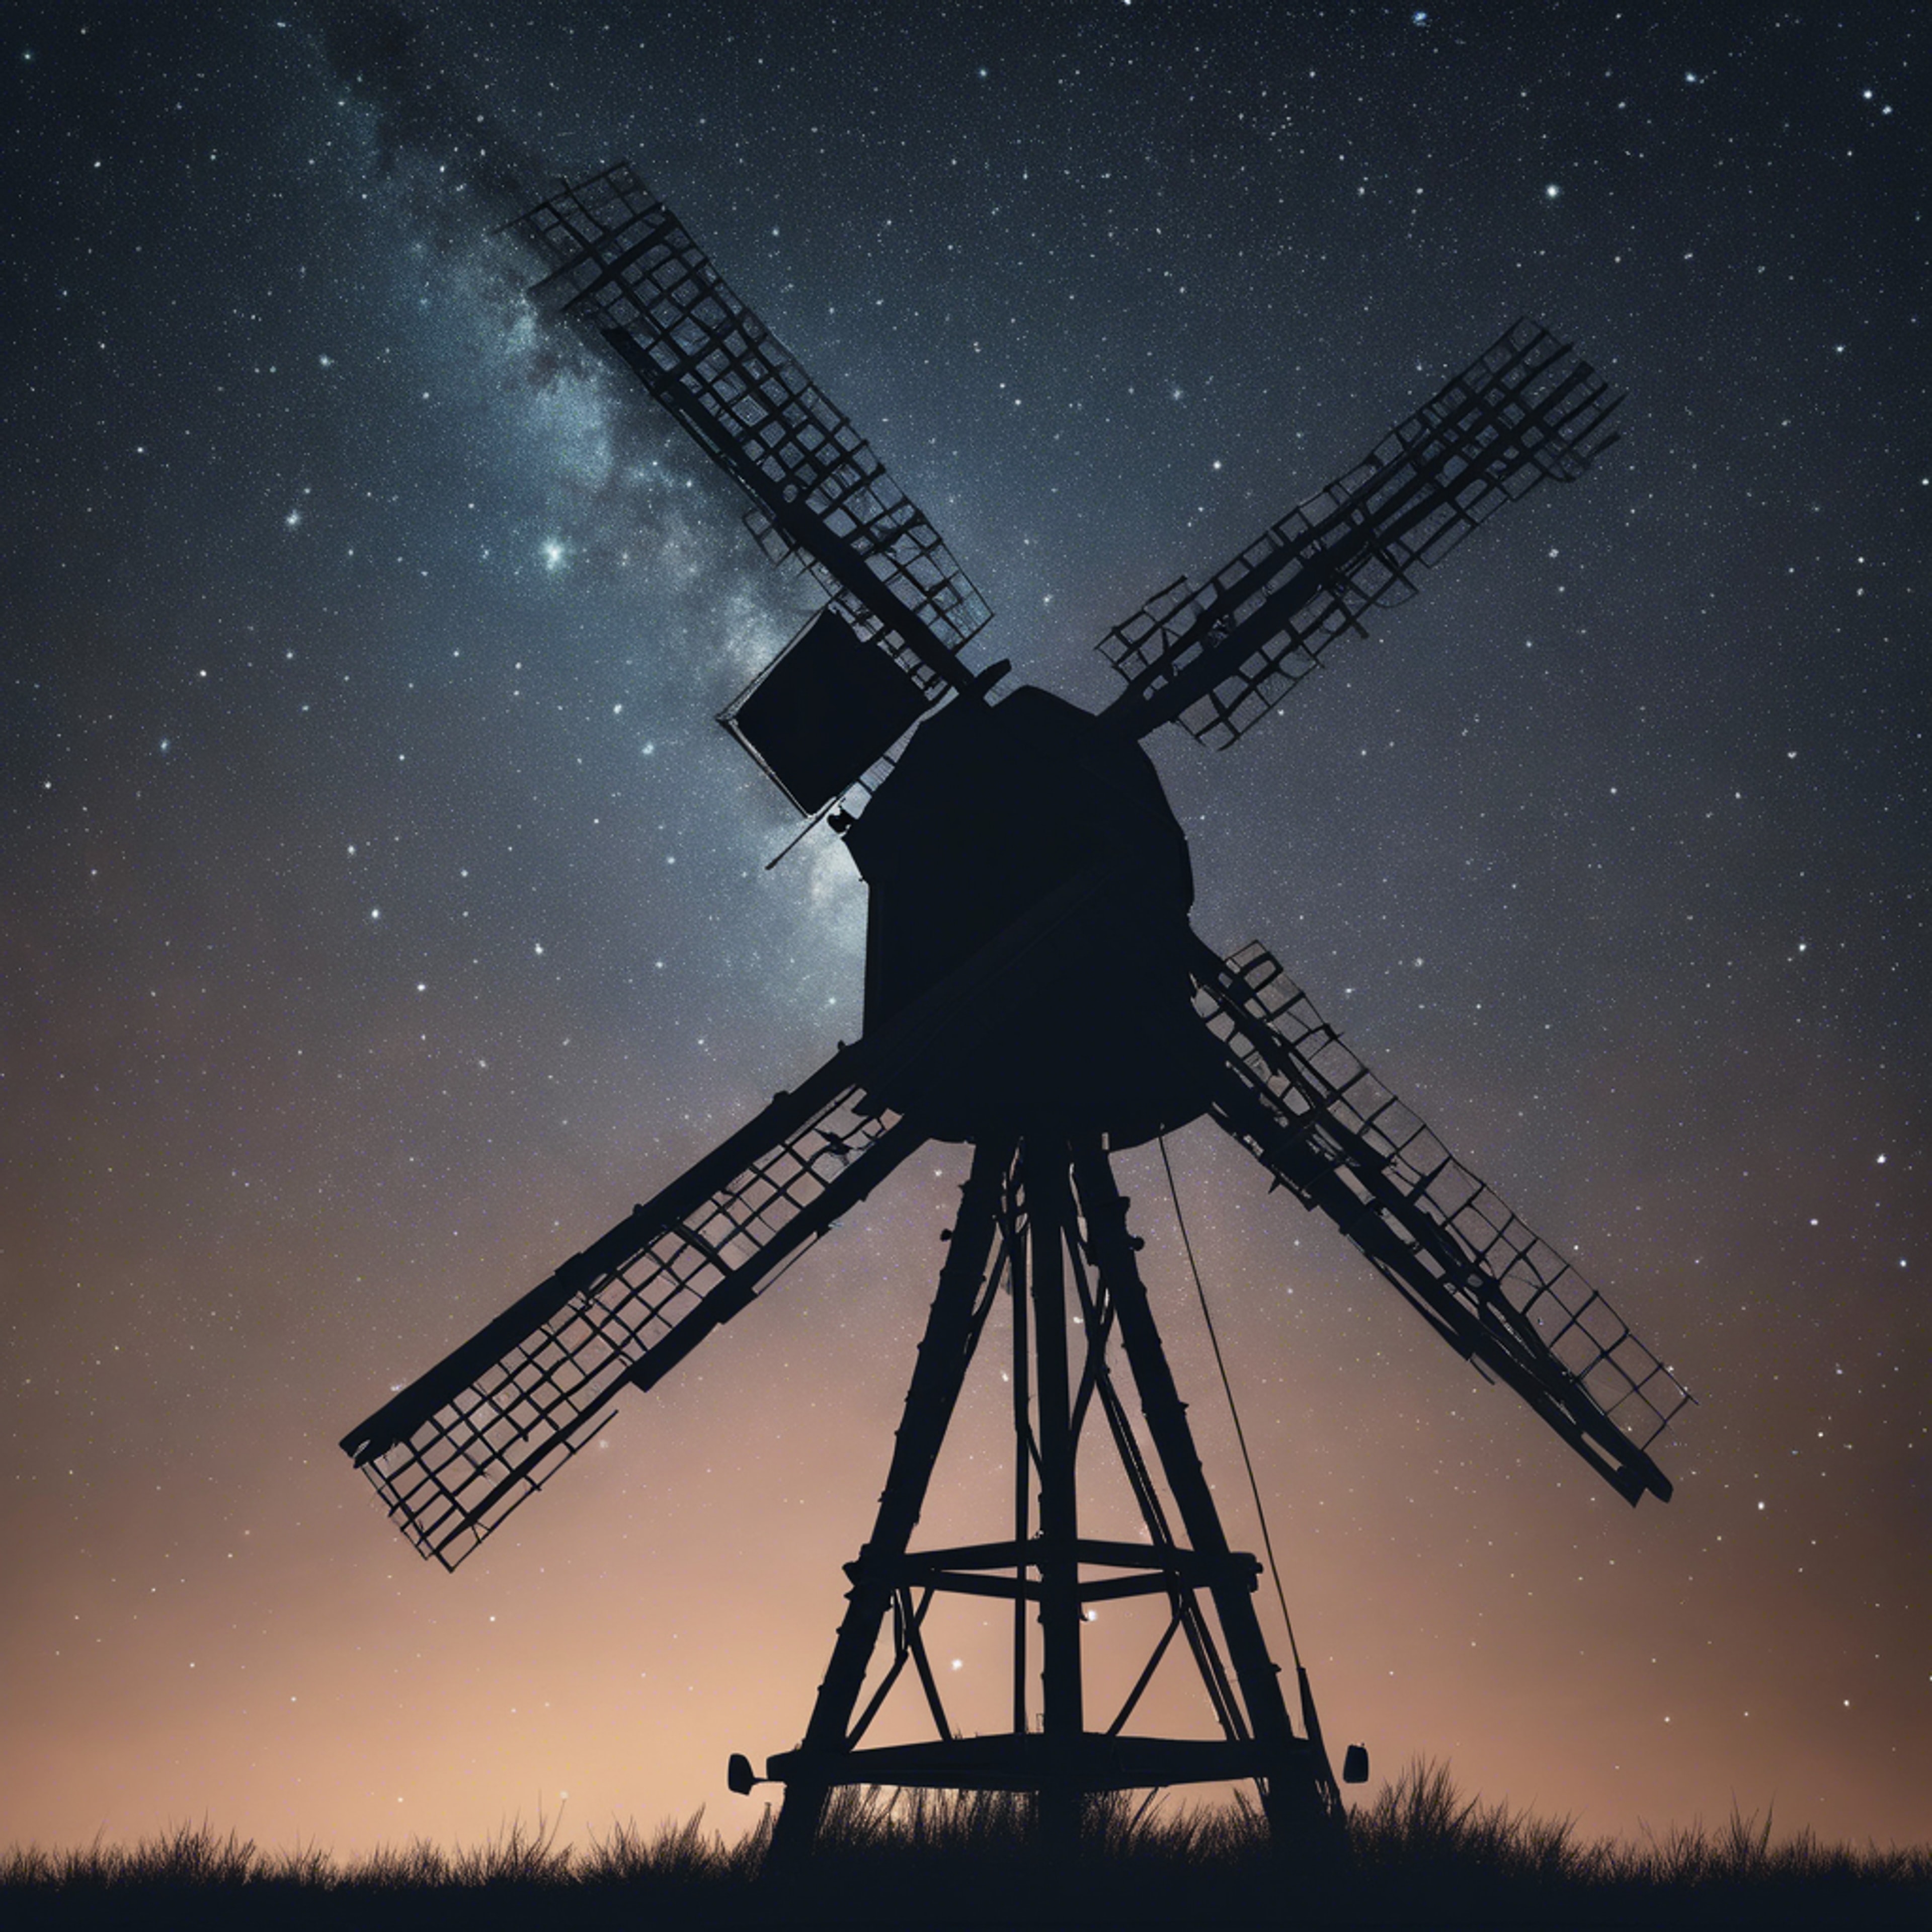 A silhouette of a traditional windmill against a mesmerizing starry night sky. Tapet[d821762278f94928b618]